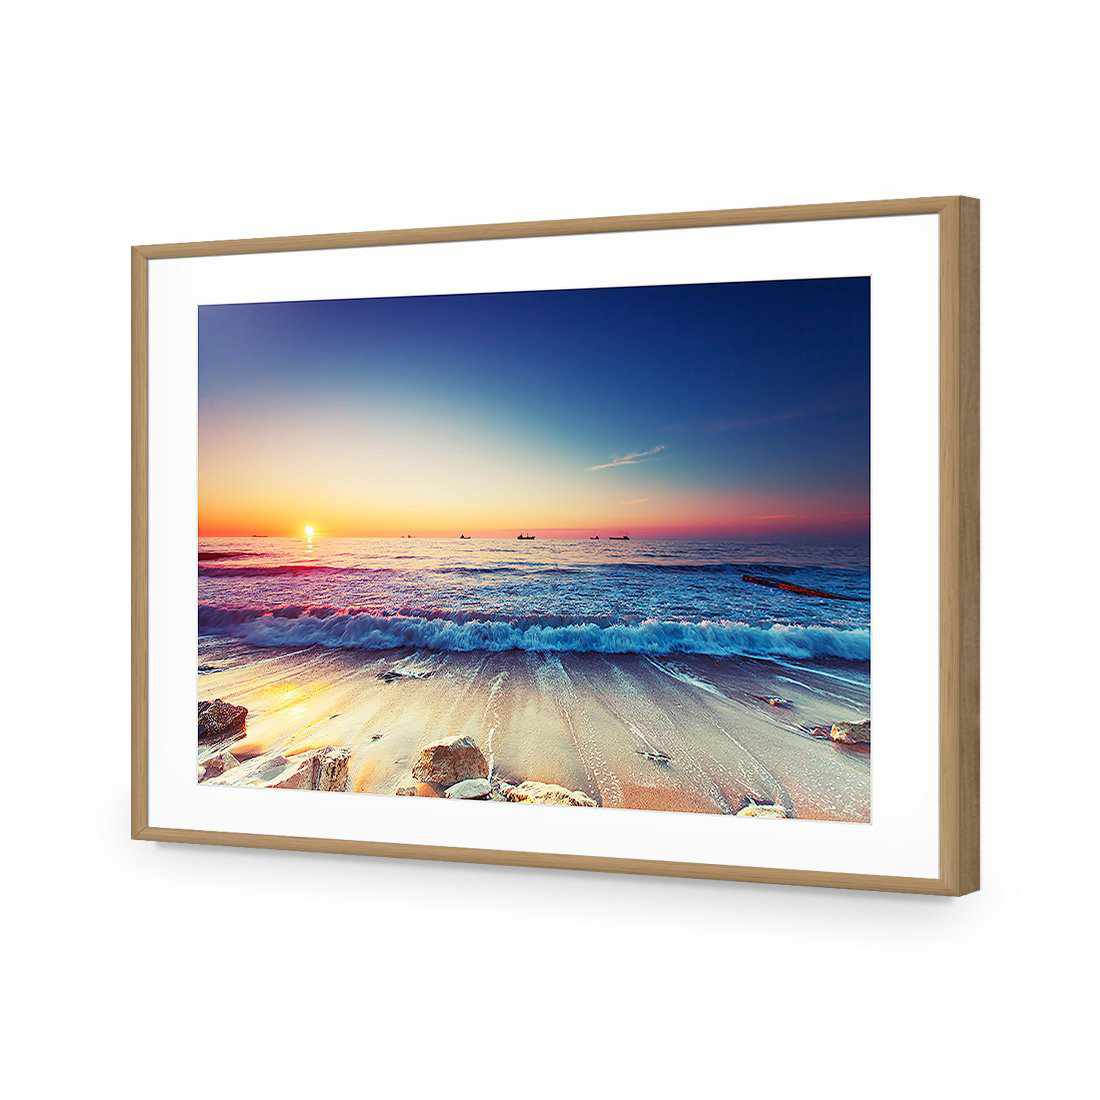 High Tide Sunset-Acrylic-Wall Art Design-With Border-Acrylic - Oak Frame-45x30cm-Wall Art Designs